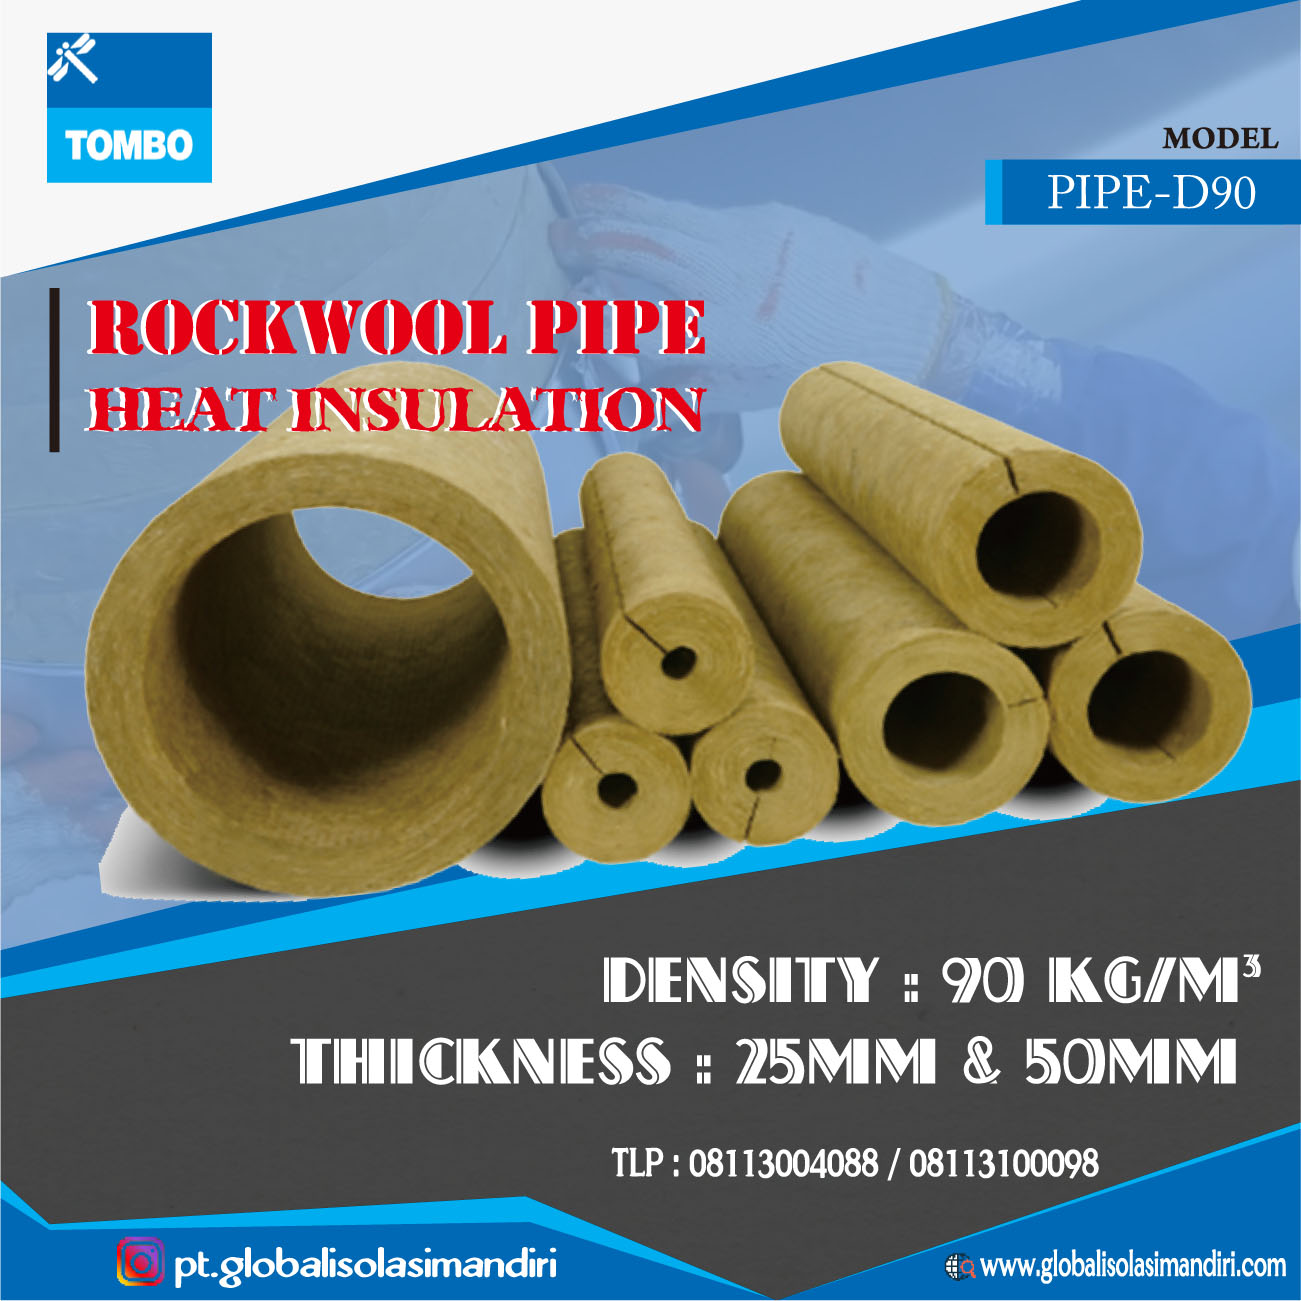 Rockwool pipa cover insulation 1/2" x 25mm x 1mtr